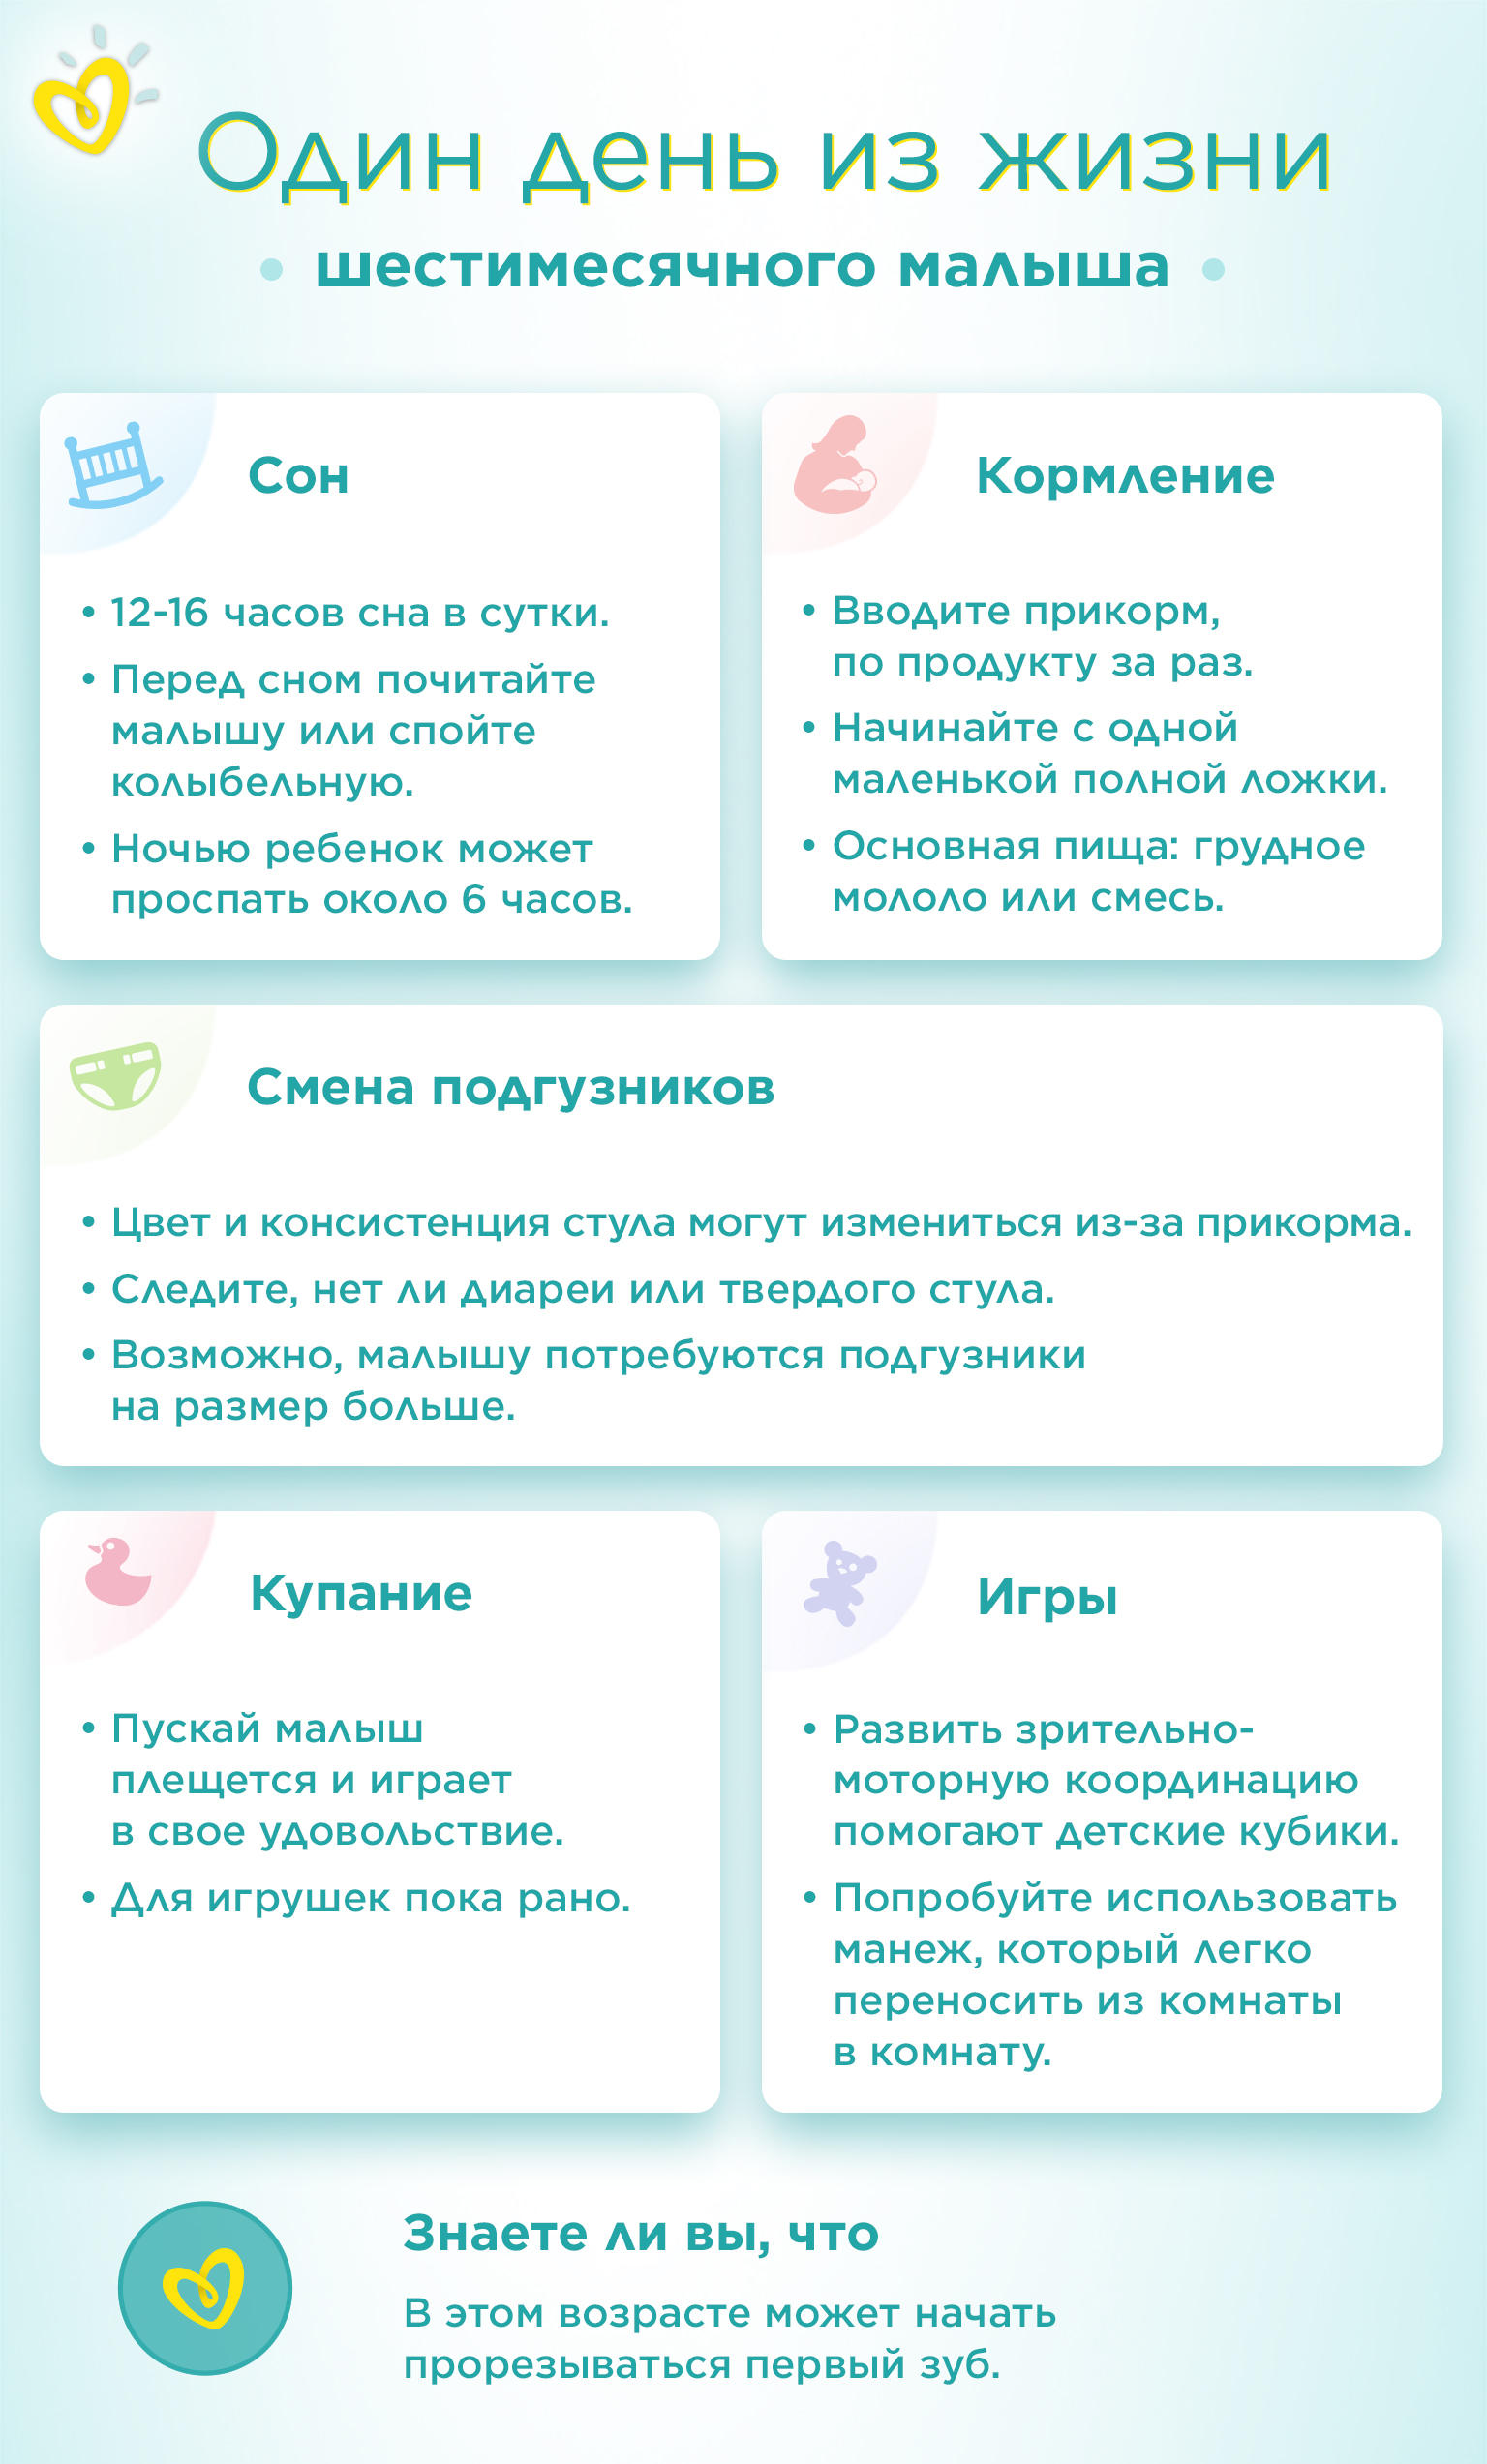 6 month old Daily Routine Infographic RU 1536